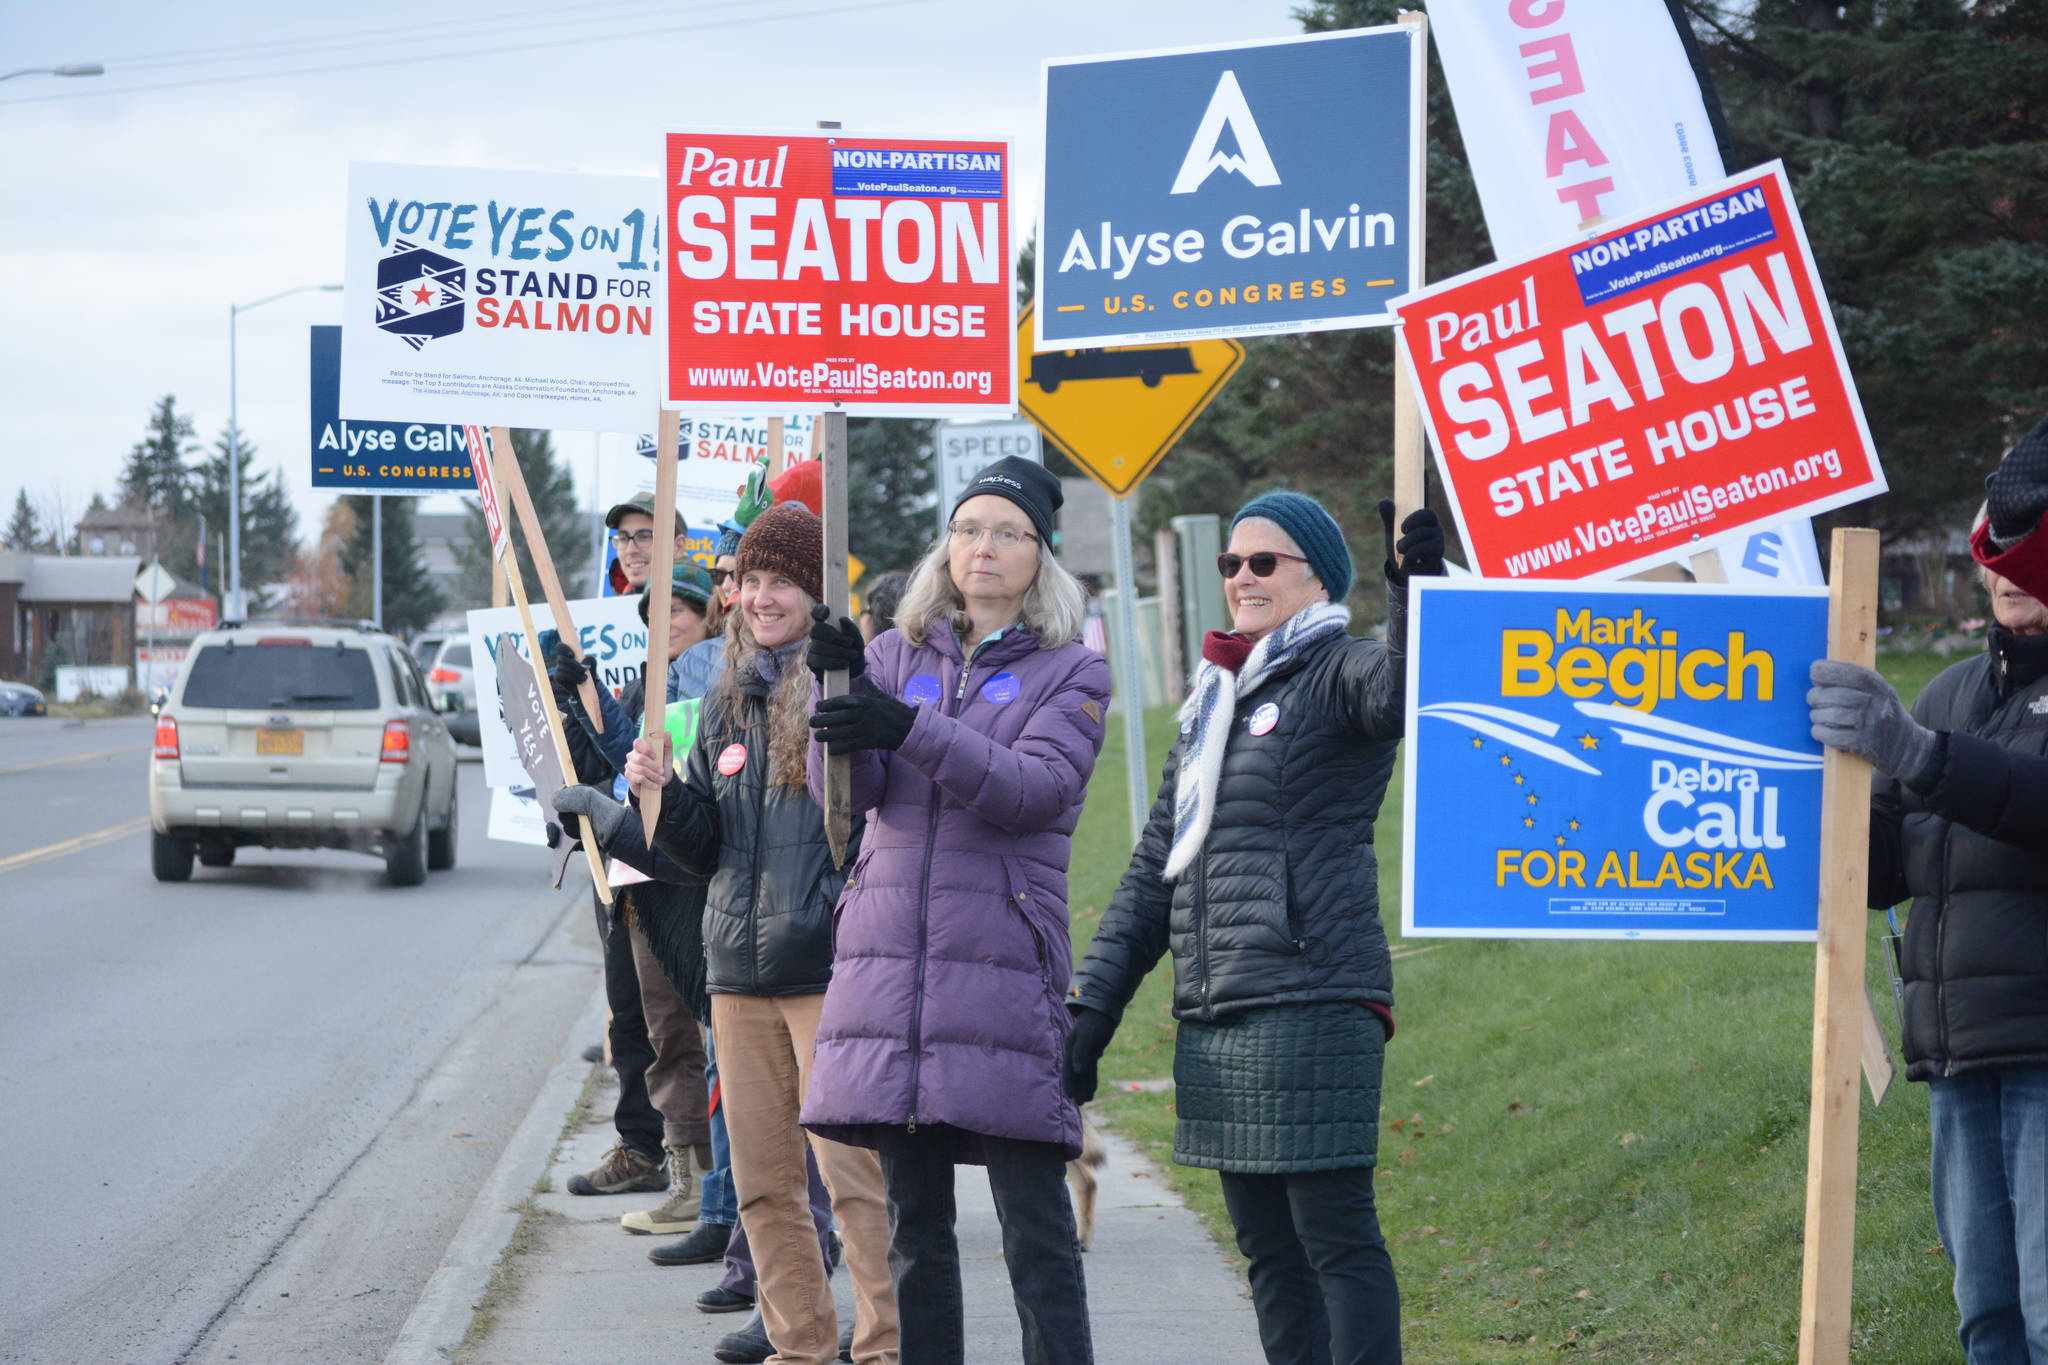 Democratic Party supporters wave signs in support of Paul Seaton, Mark Begich, Alyse Galvin and Yes on Ballot Measure 1. They were at the corner of Lake Street and Pioneer Avenue about 12:30 p.m. Nov. 6, 2018, in Homer, Alaska. (Photo by Michael Armstrong/Homer News0